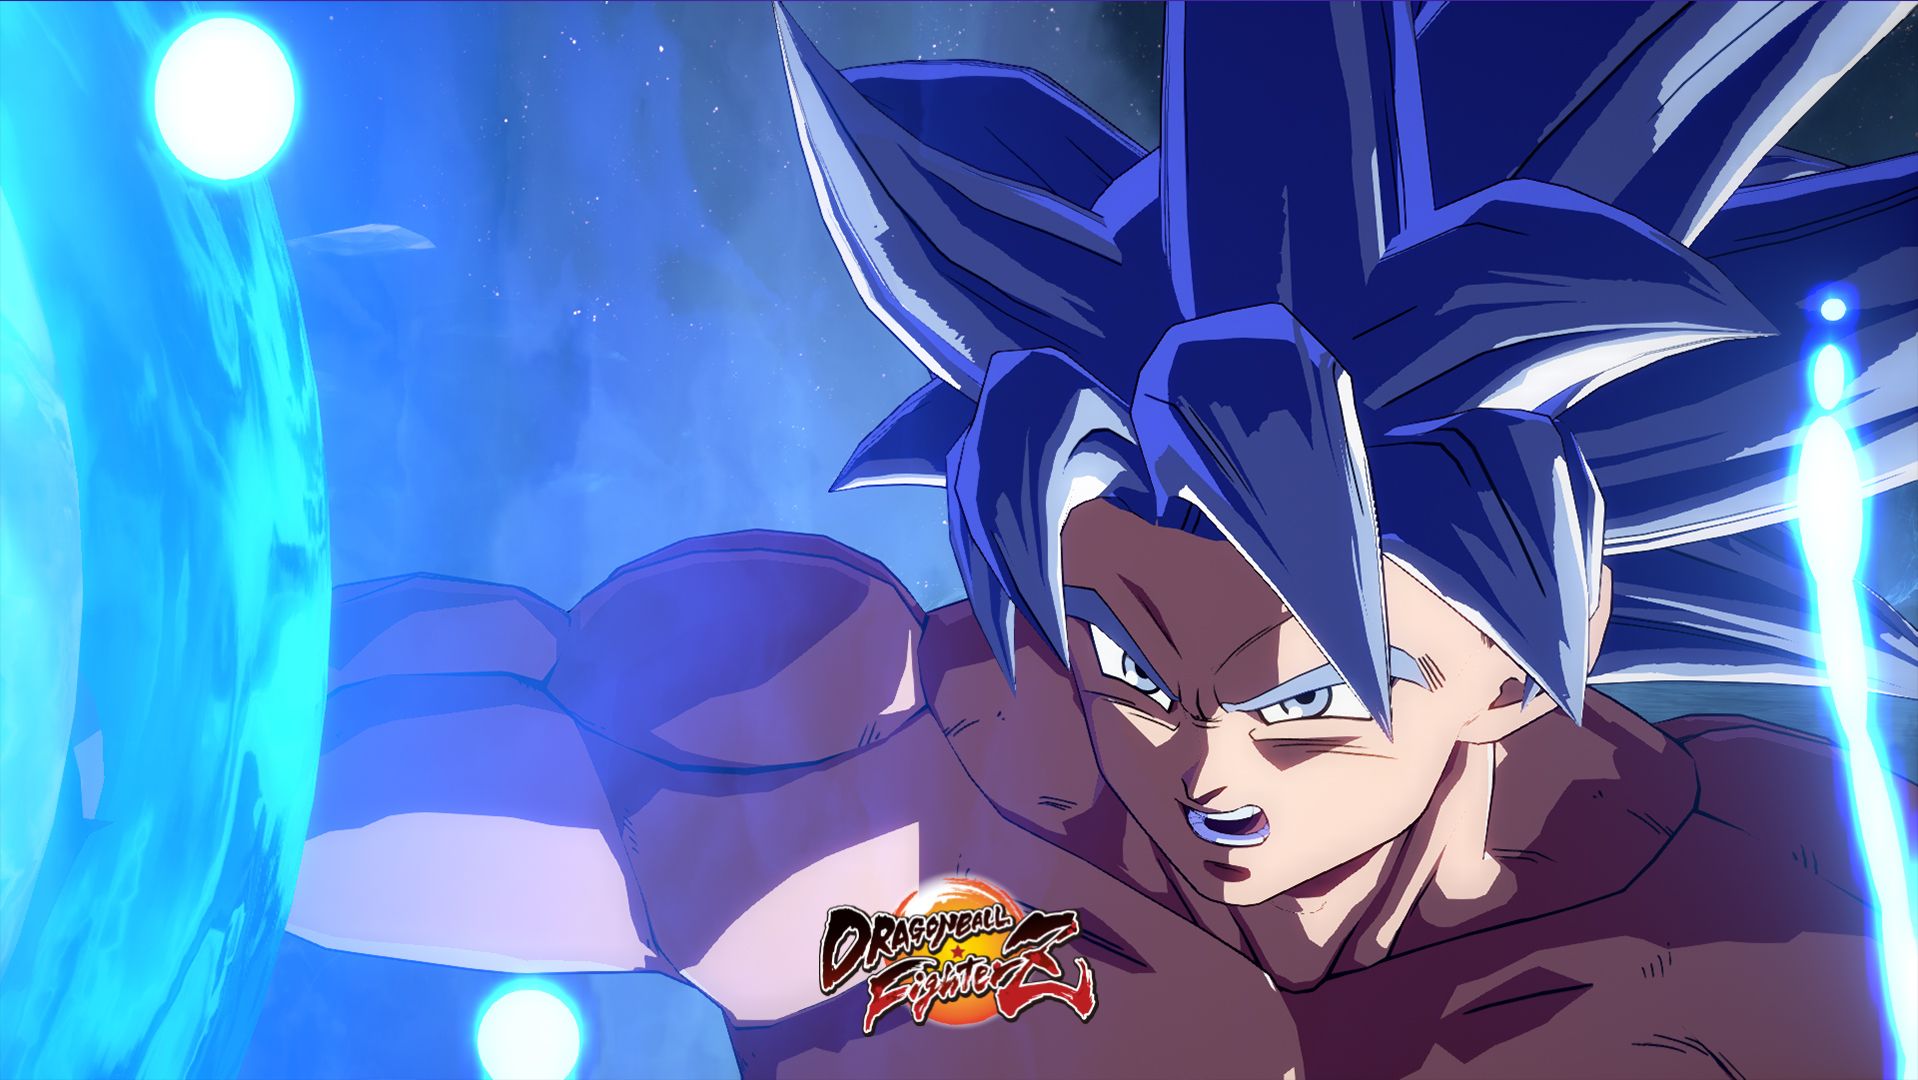 New Image for Ultra Instinct Goku in Dragon Ball FighterZ Released